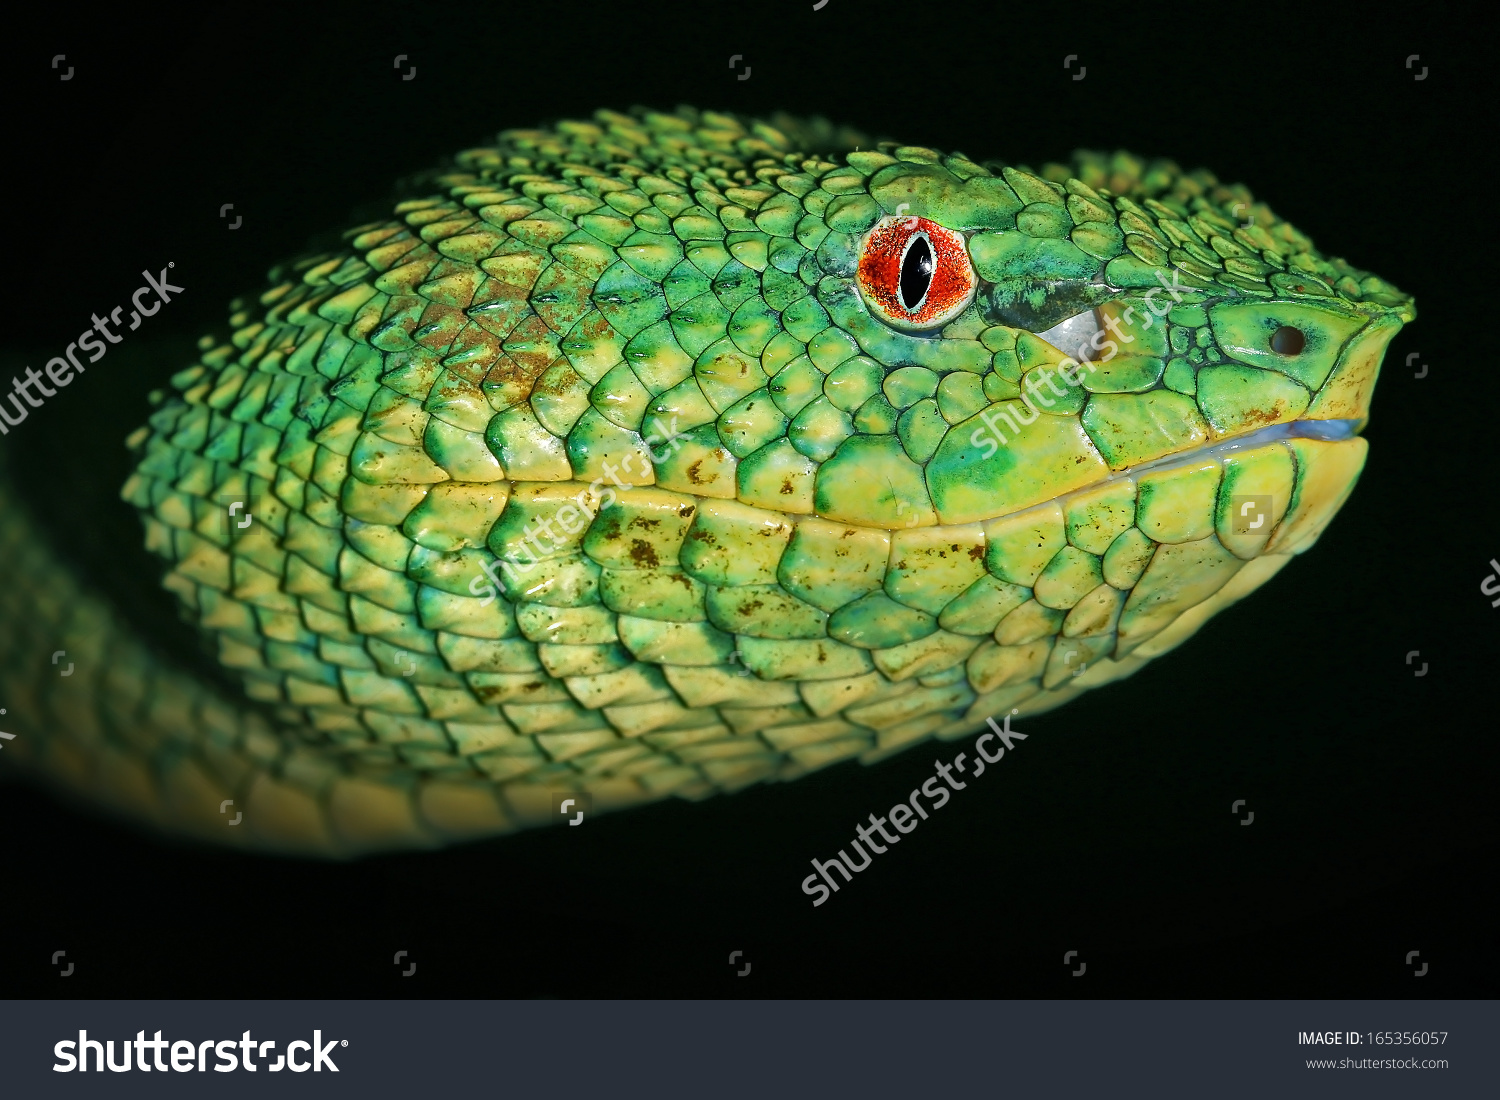 Green Pit Viper clipart #2, Download drawings